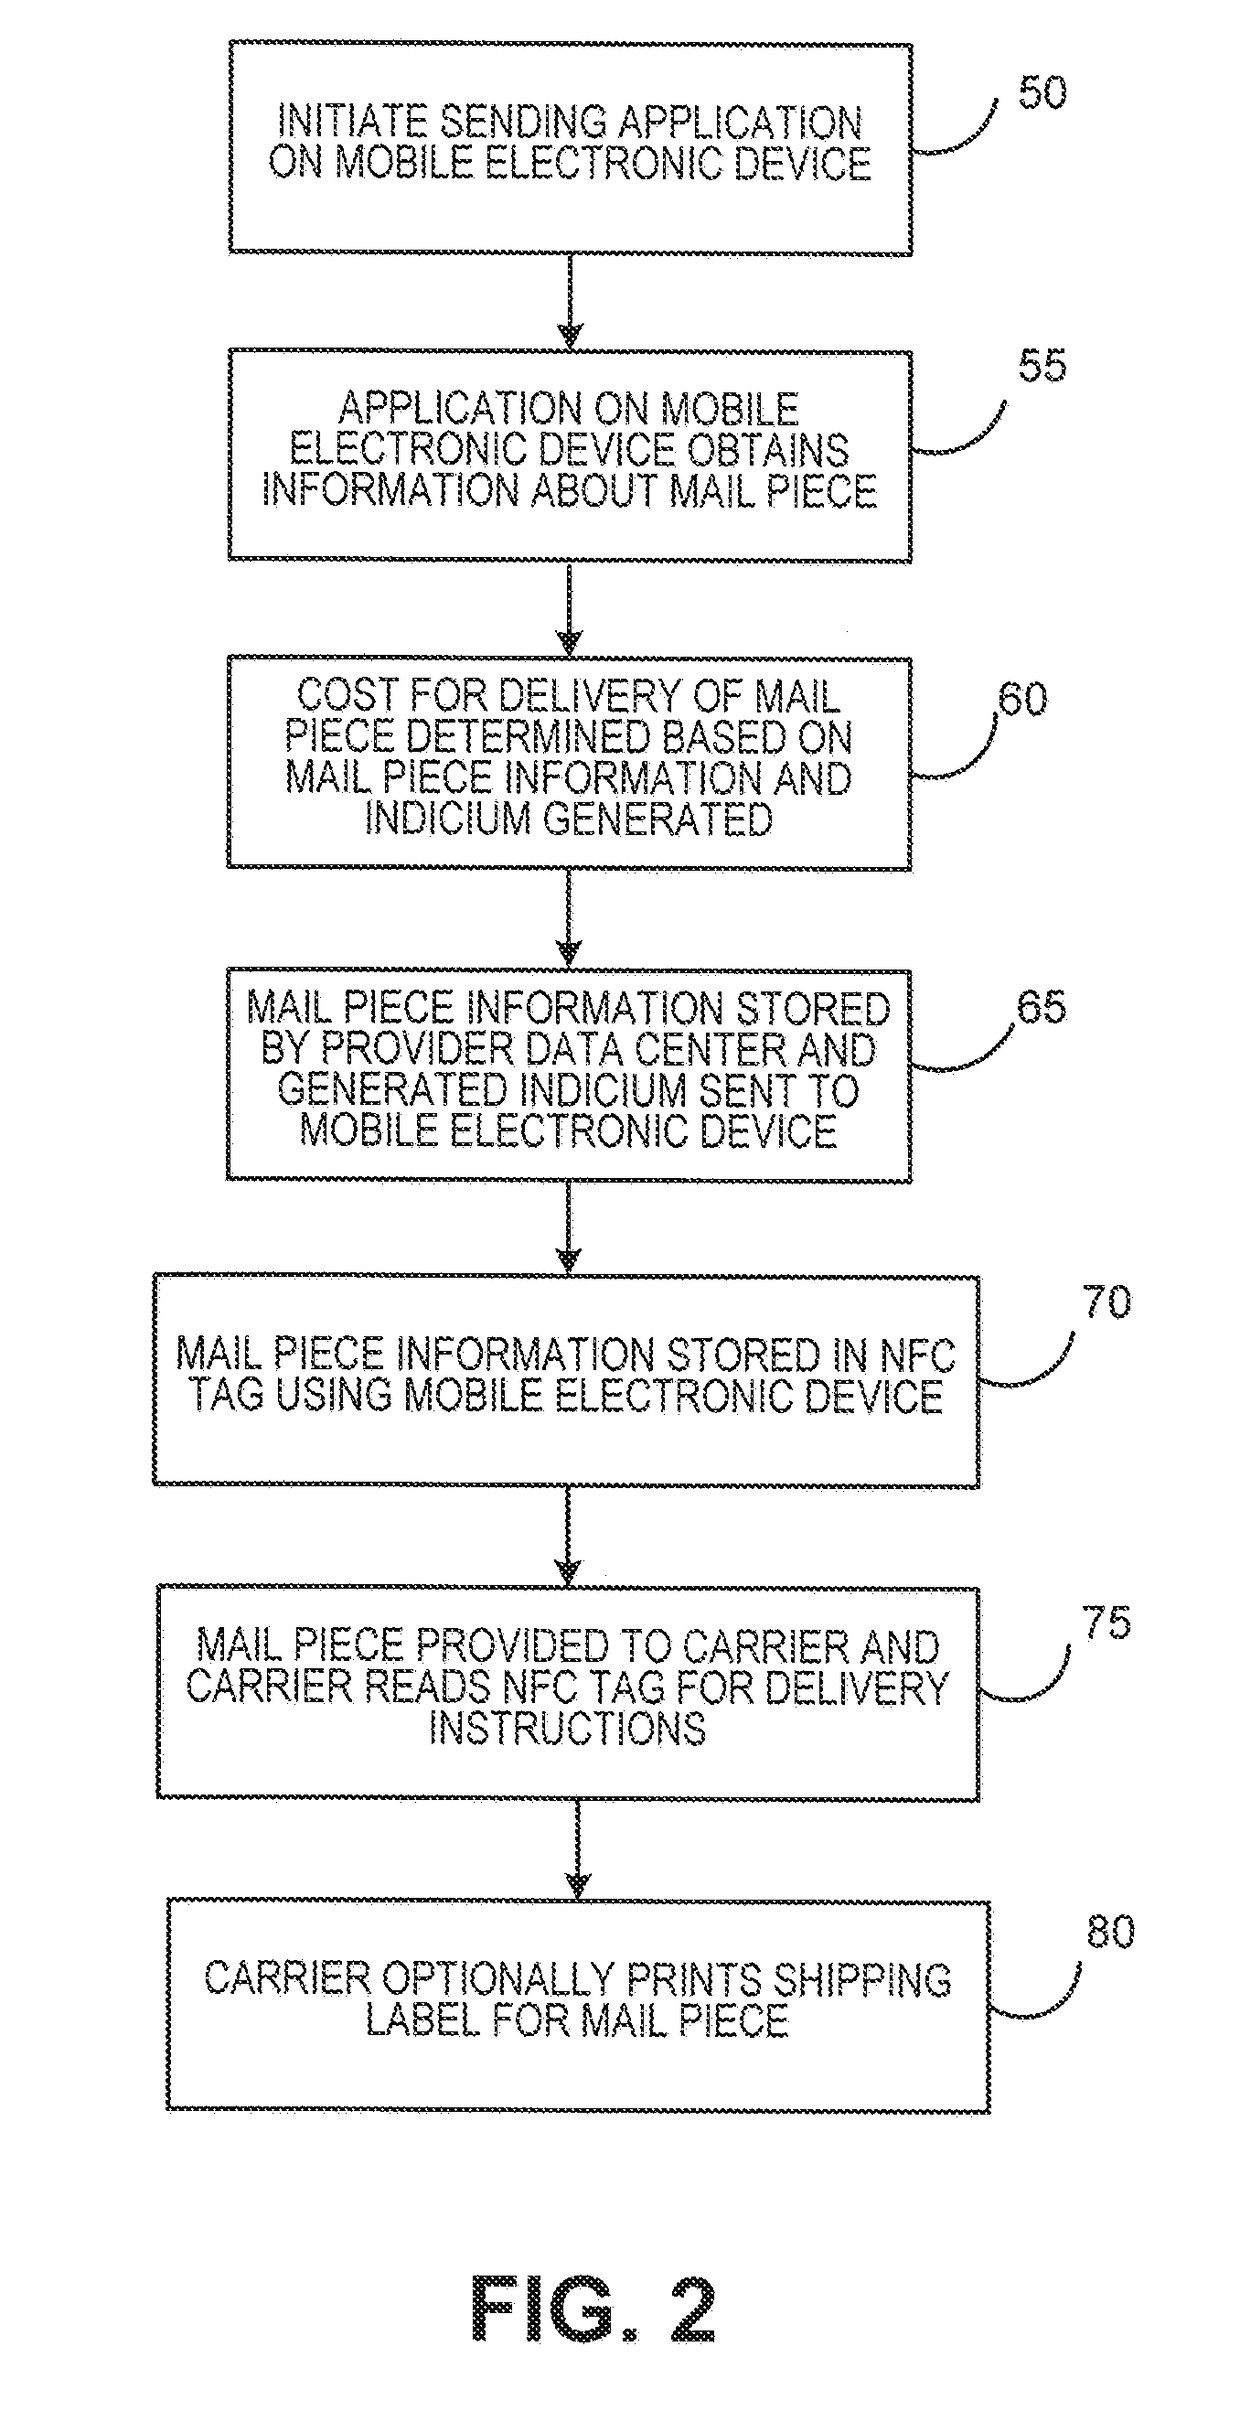 Generating and dispensing evidence of payment for delivery of a mail piece using a mobile device and NFC tag